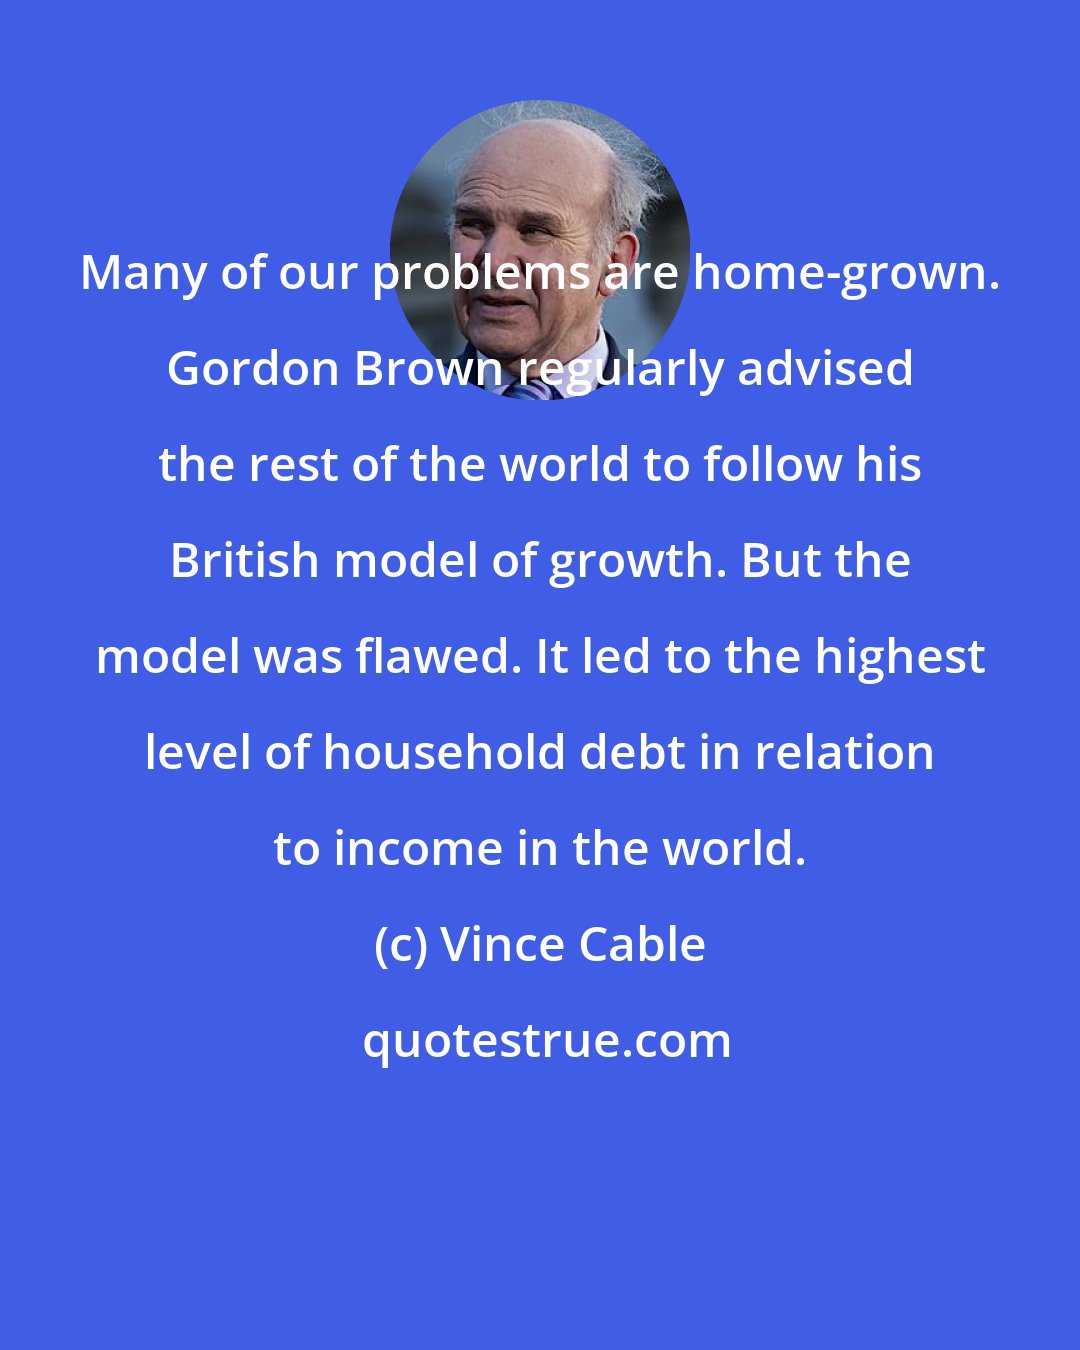 Vince Cable: Many of our problems are home-grown. Gordon Brown regularly advised the rest of the world to follow his British model of growth. But the model was flawed. It led to the highest level of household debt in relation to income in the world.